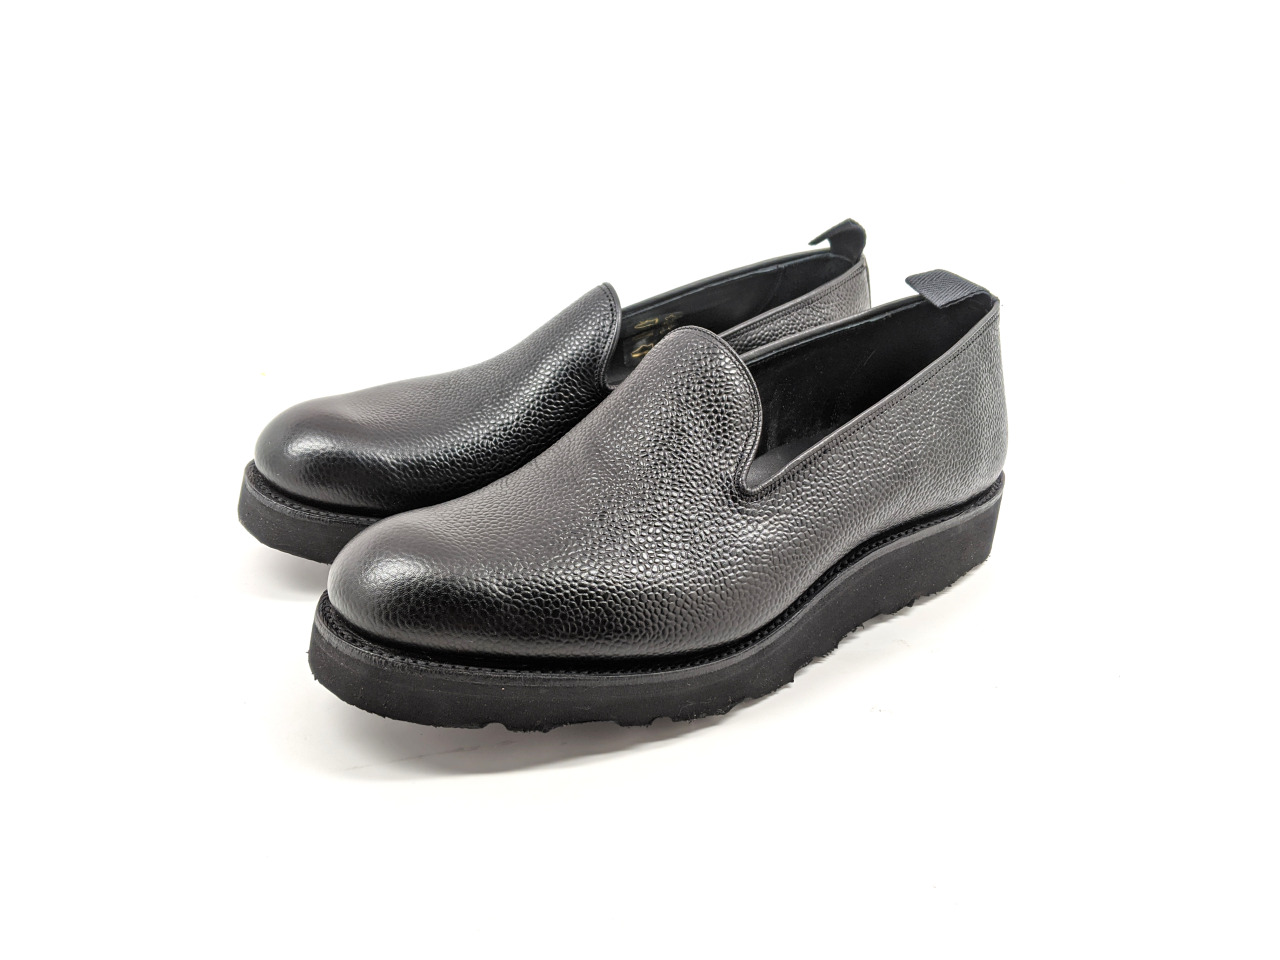 NEPENTHES NEW YORK — 「IN STOCK 」 Tricker's x Engineered Garments 